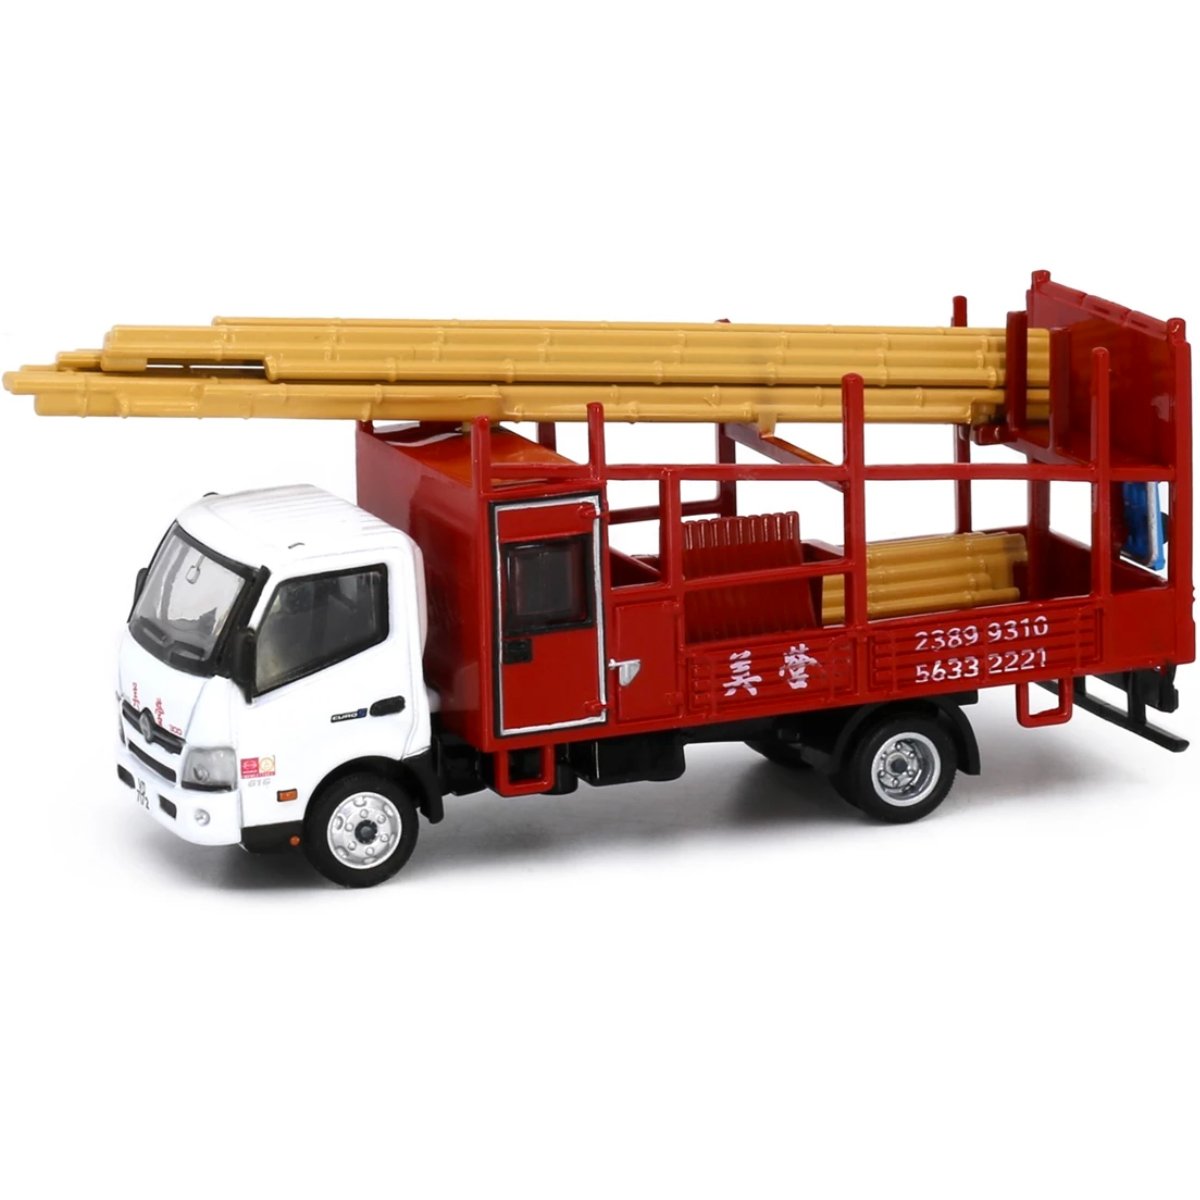 Tiny Models Hino 300 Bamboo Scaffolding Lorry (1:76 Scale) - Phillips Hobbies